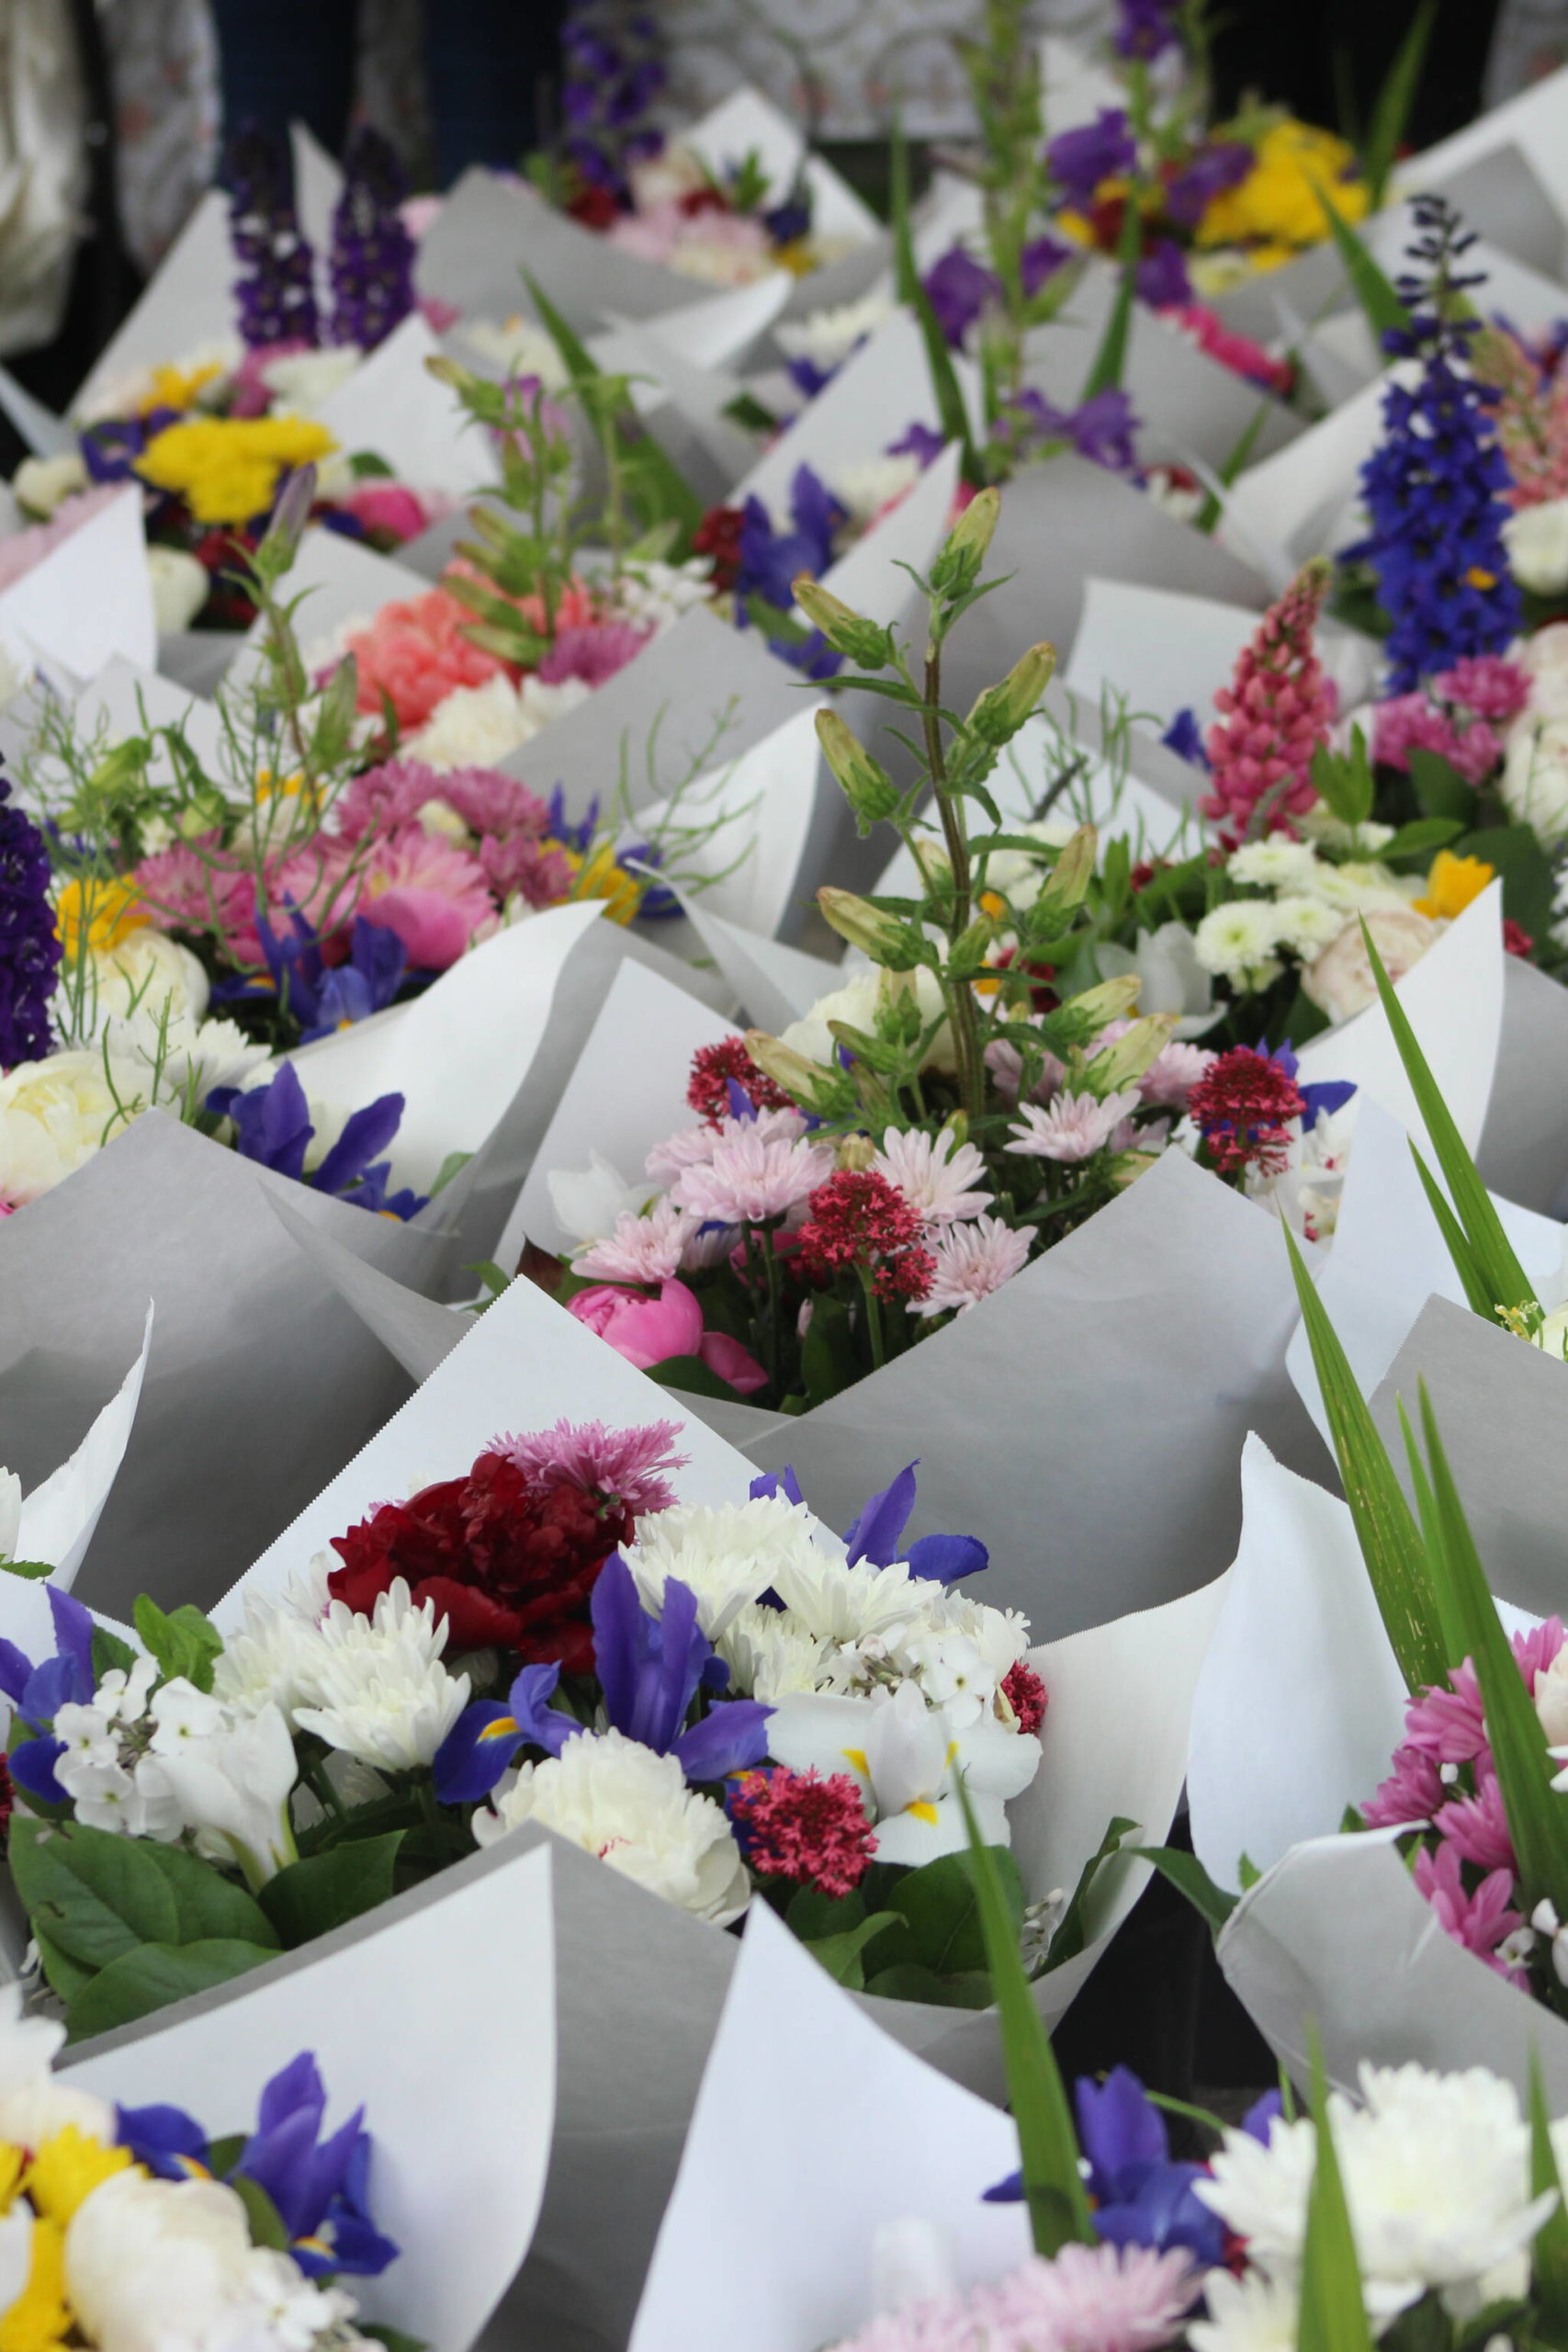 Along with produce, drinks, art and ready-to-eat food, the Renton Farmers Market offers cut flowers. Photo: Bailey Jo Josie/Sound Publishing.